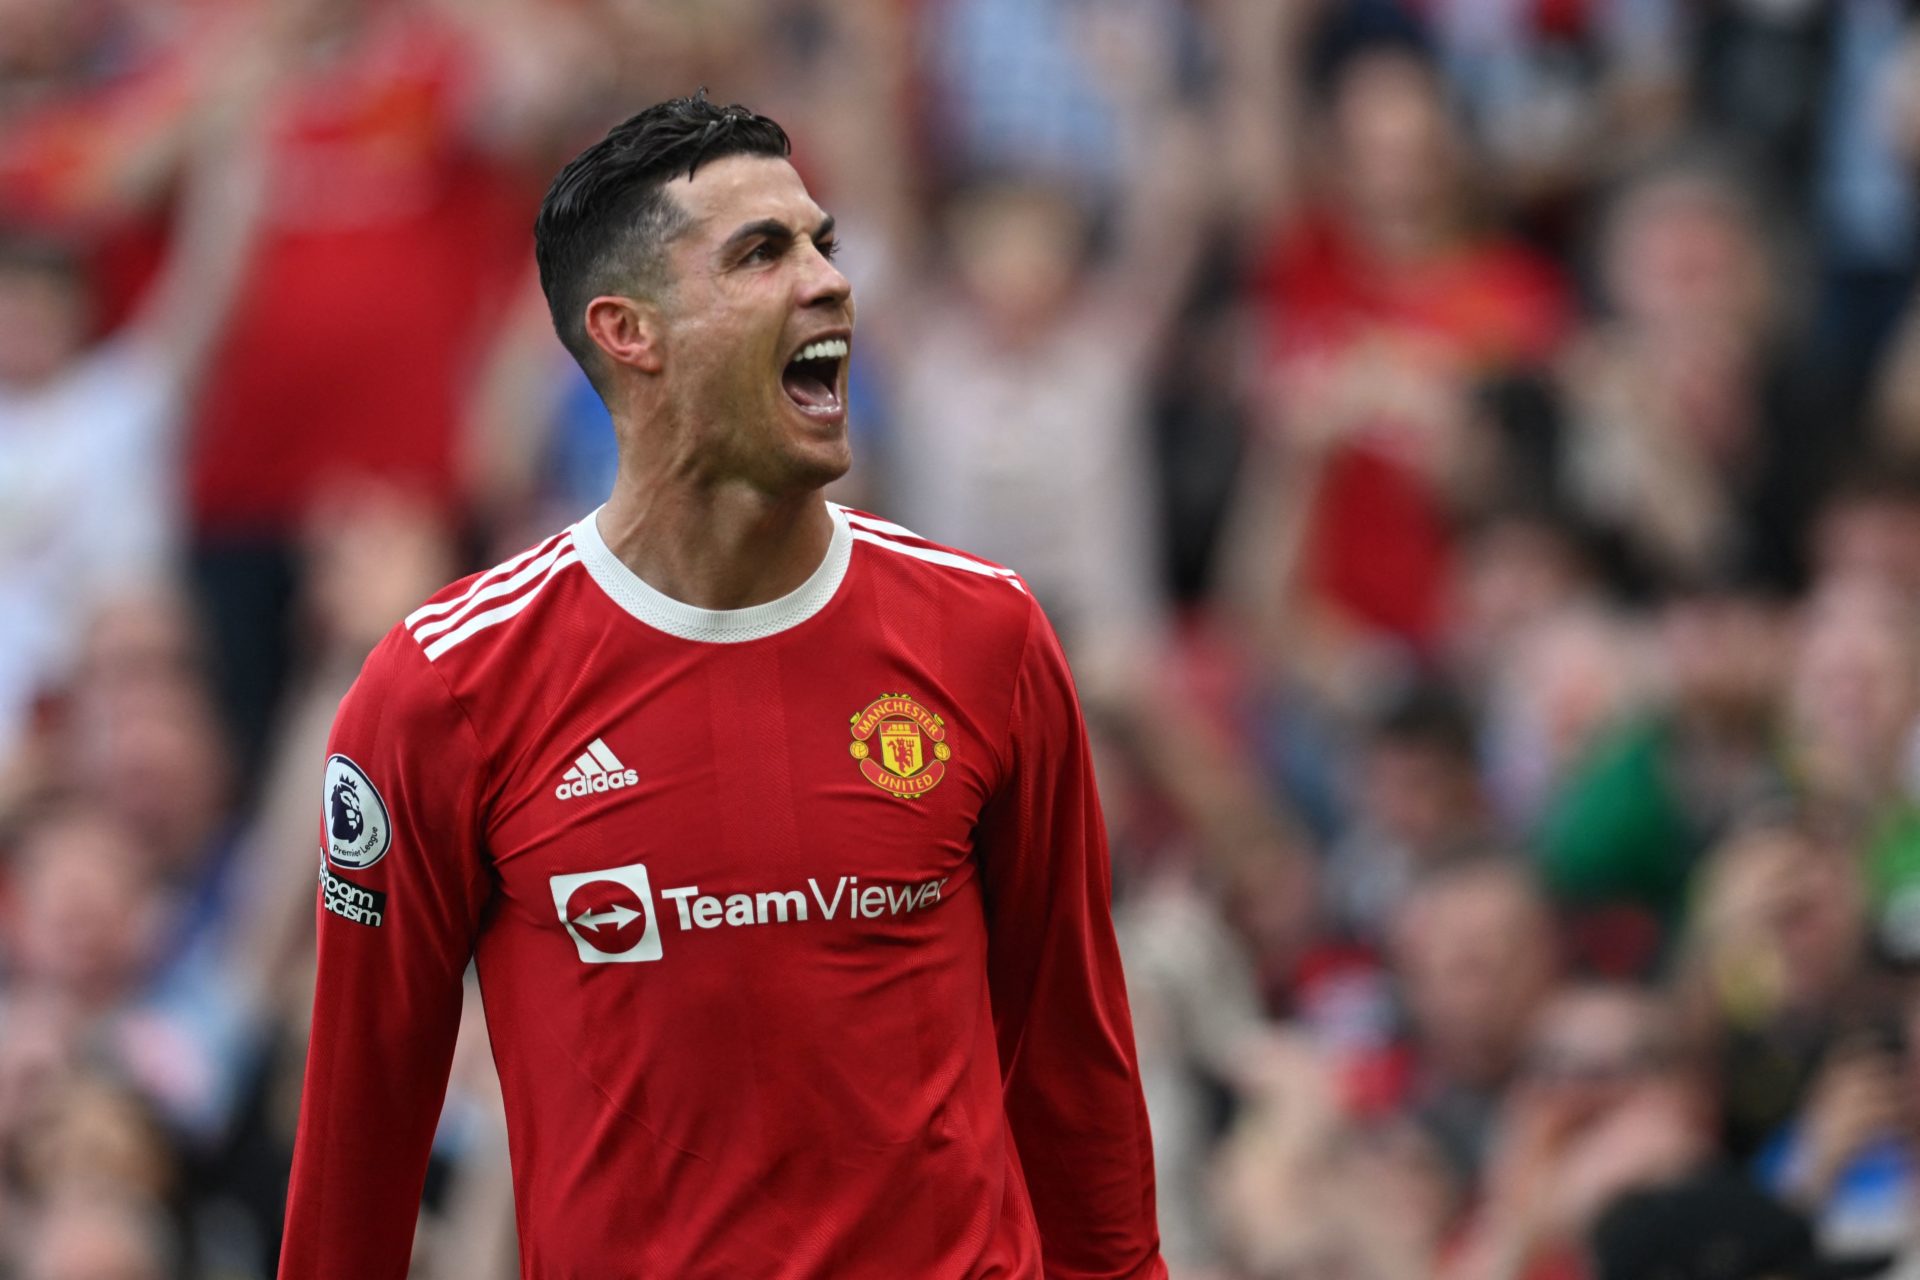 Finally Man Utd hero accept to leave the club immediately as £211m deal accepted